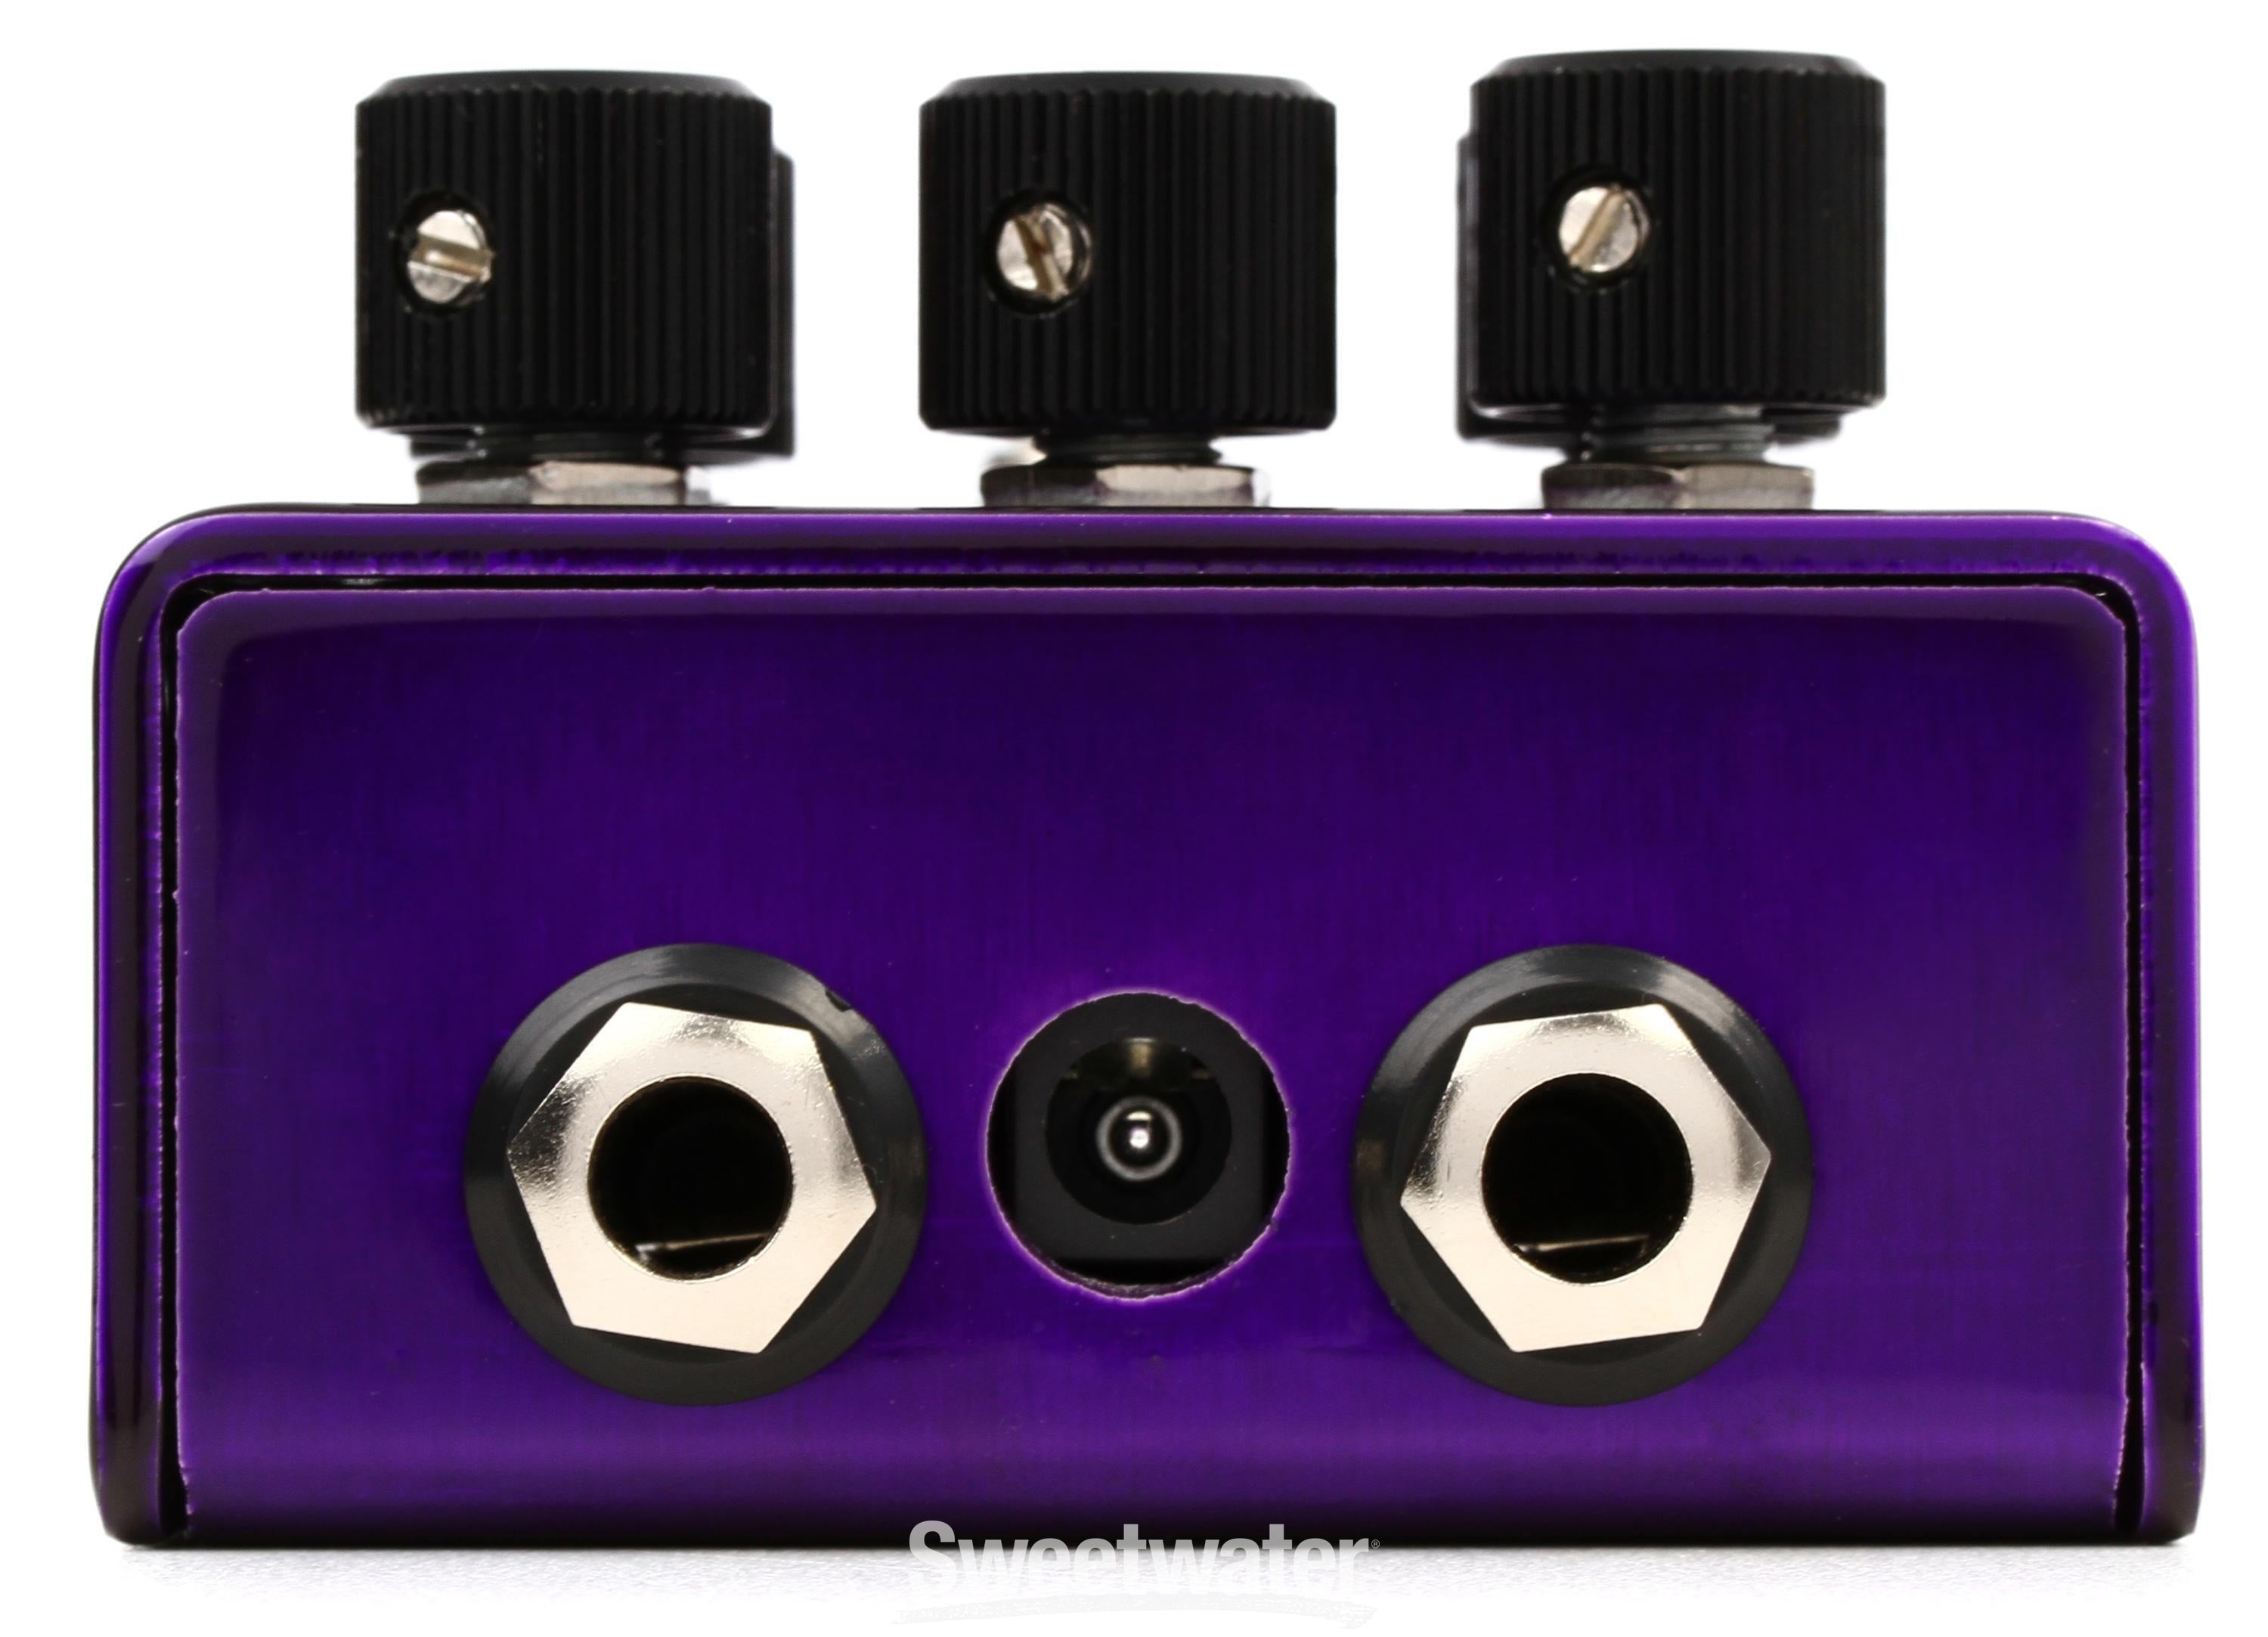 Revv G3 Purple Channel Preamp/Overdrive/Distortion Pedal | Sweetwater